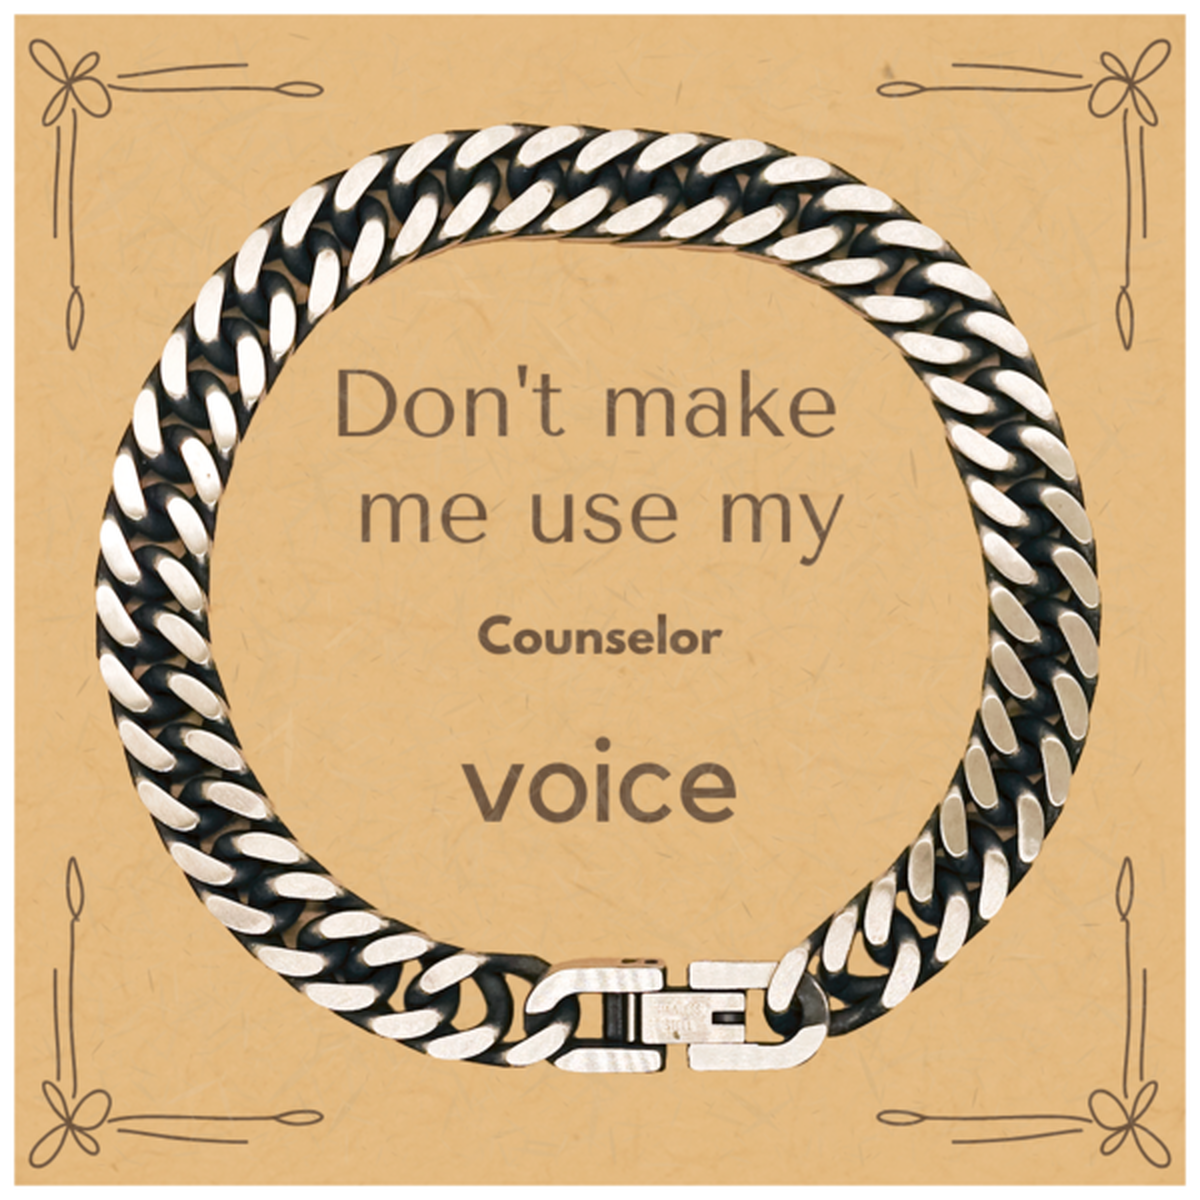 Don't make me use my Counselor voice, Sarcasm Counselor Card Gifts, Christmas Counselor Cuban Link Chain Bracelet Birthday Unique Gifts For Counselor Coworkers, Men, Women, Colleague, Friends